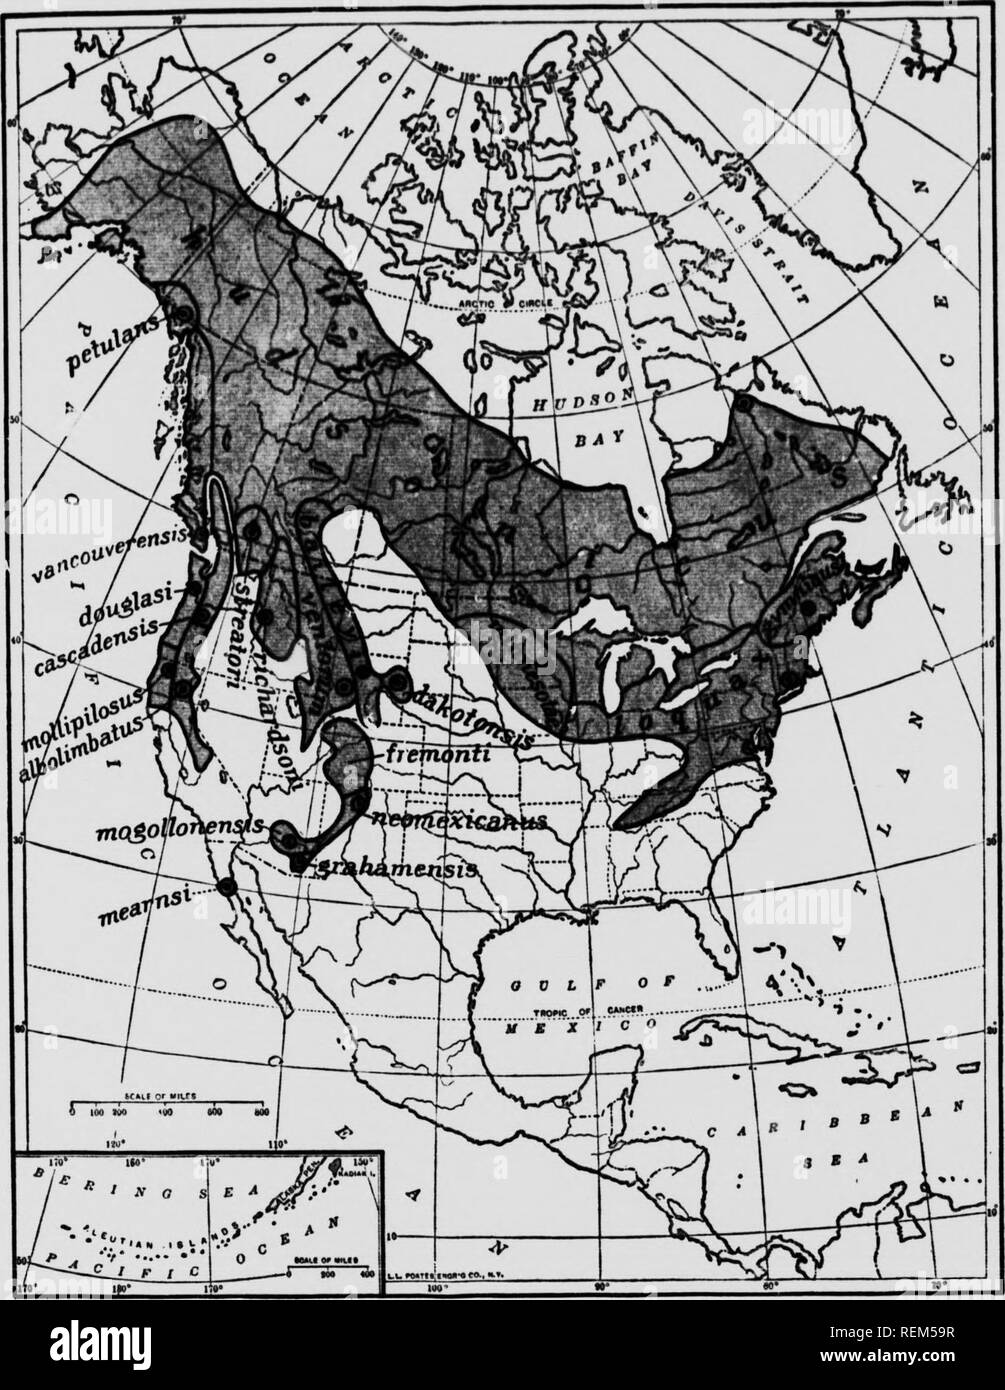 . Life-histories of northern animals [microform] : an account of the mammals of Manitoba. Mammals; Mammals; Mammifères; Mammifères. MAP 13—RAlfGE OF THE HORTH AMERICAIT RED-SQUIRRELS. Thij map is founded chiefly on Dr I. A. Allen's Revision of the Chickarees (1898). with assistance (roin ihe records by O. Bann, R. Macfjriane, li V. Ntii.,ii, .u^uU.n ina liachmin, S. N. Rhoads. G. S. Miilcr, C. Hurt M^nmn, W H Osgr.-.l, R A. Preble 11 must be considered diagrammatic and provisional. The facta are not yet available to make an absolute map of distribution. Fo| th« sake of clearness the ranges a Stock Photo